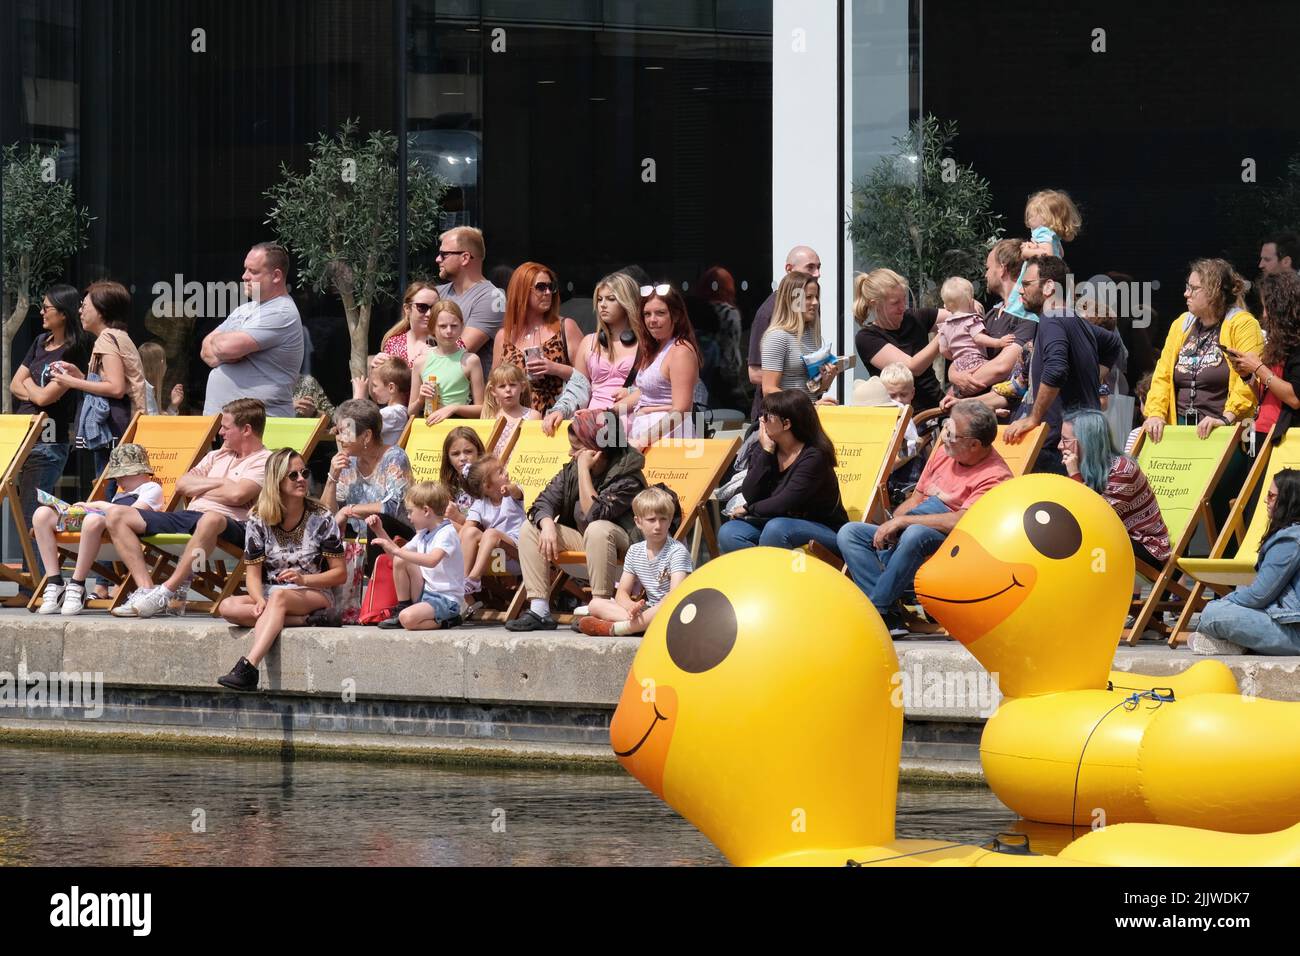 London, UK, 28th July, 2022. Hundreds of rubber ducks filled Paddington Basin at Merchant Square for the annual rubber duck race to raise vital funds for the Children of St Mary's Intensive Care (COSMIC) charity.  Credit: Eleventh Hour Photography/Alamy Live News Stock Photo